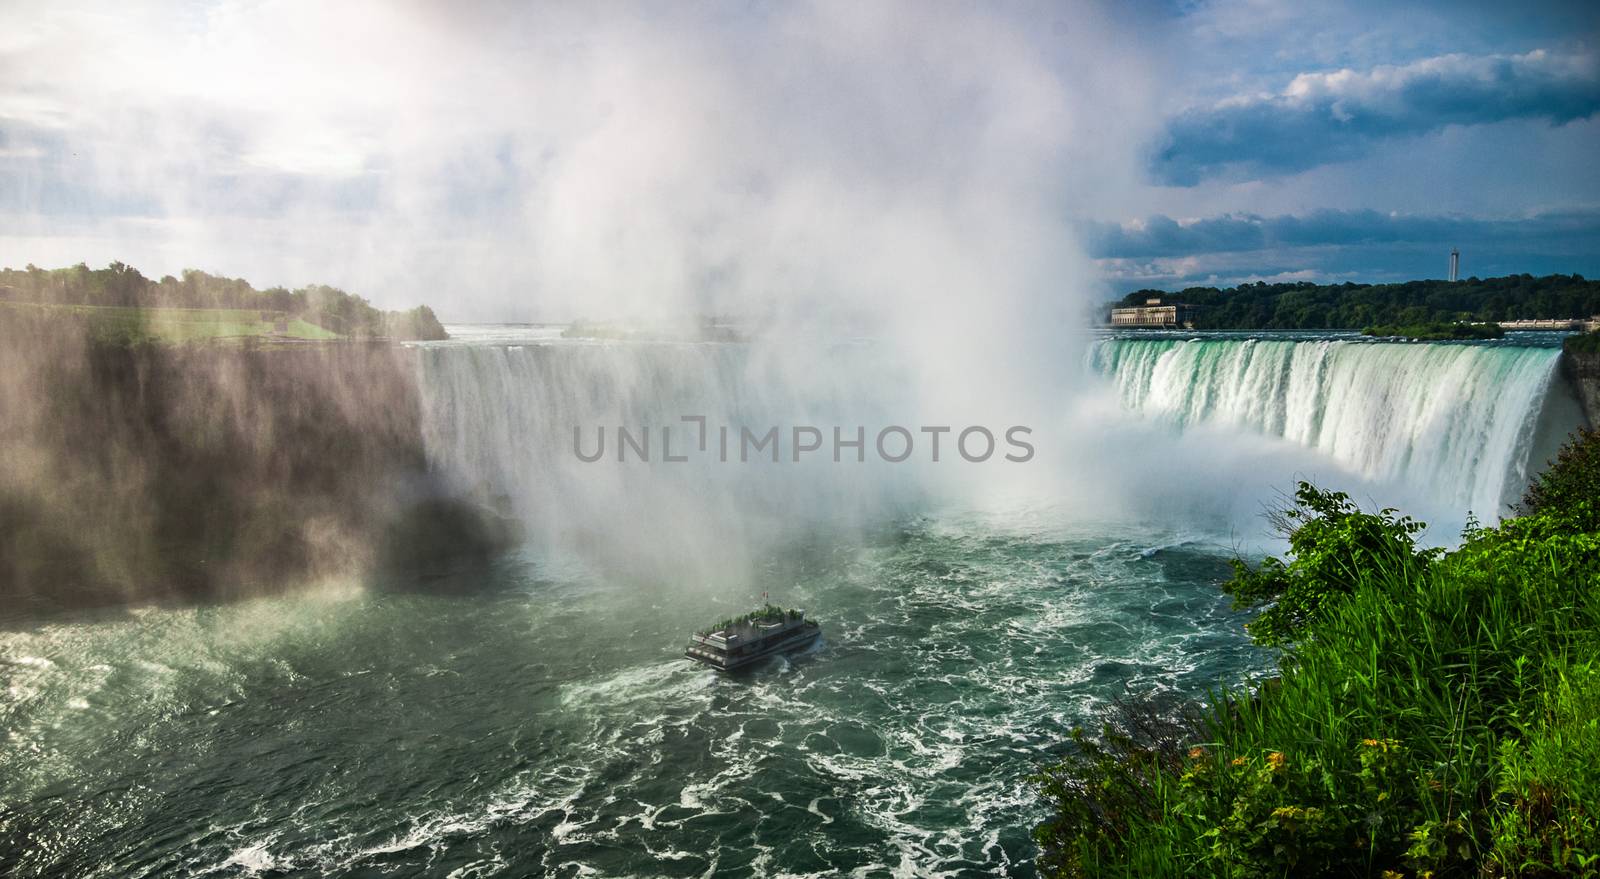 Views of the mighty Niagara River and Falls and those who would tour it, from the surrounding areas.